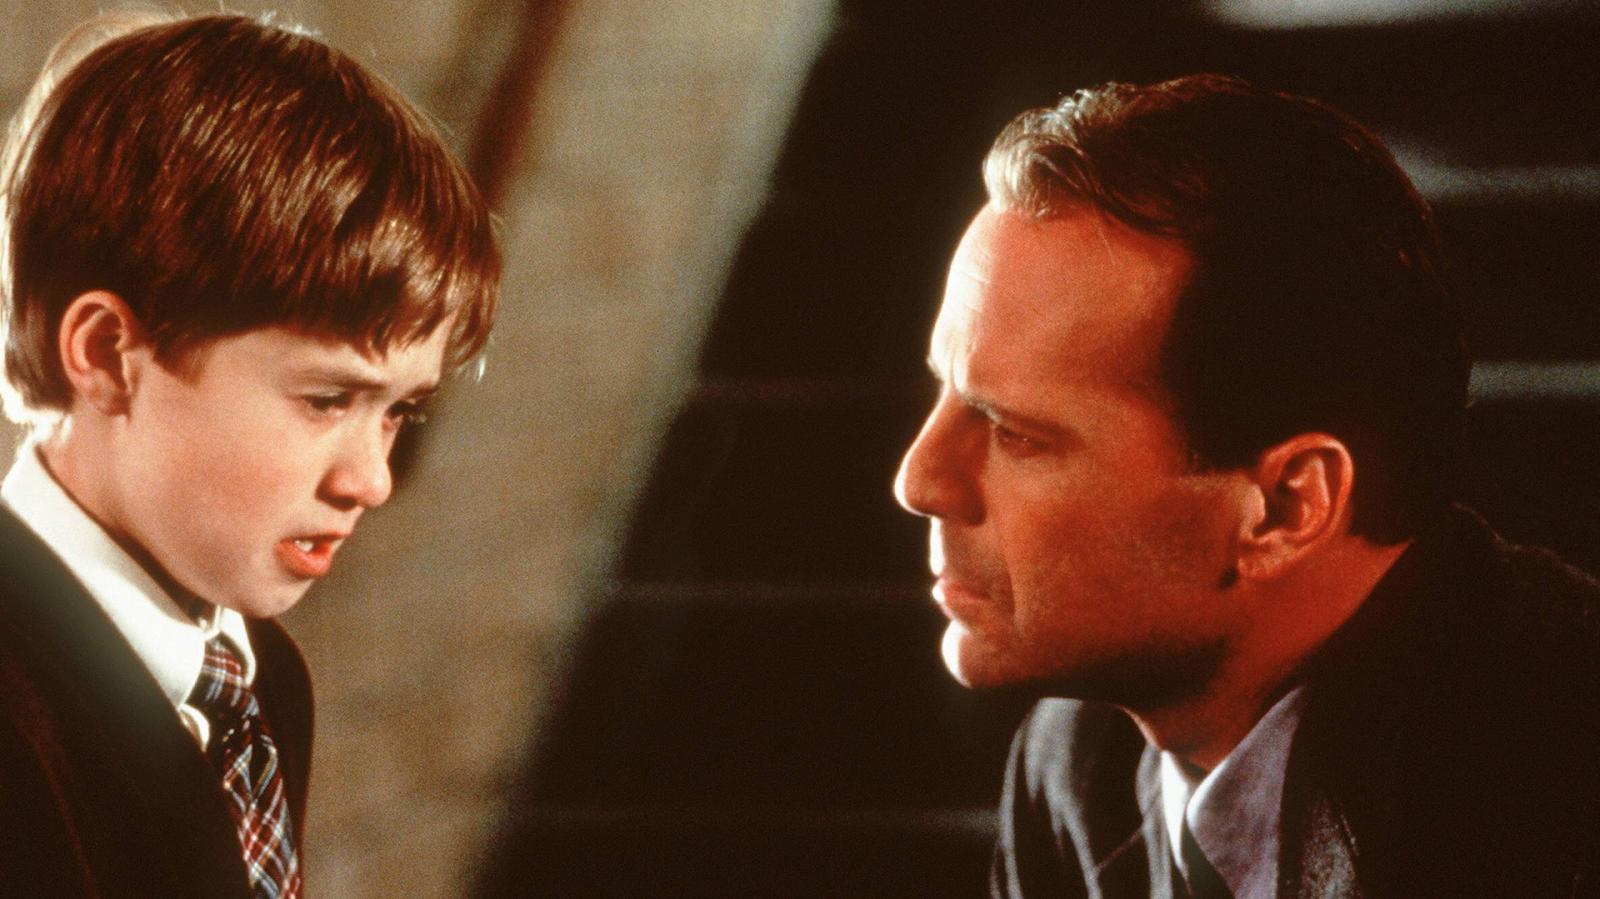 Mind Games Much? Ranking the 15 Best Psychological Thrillers - image 11